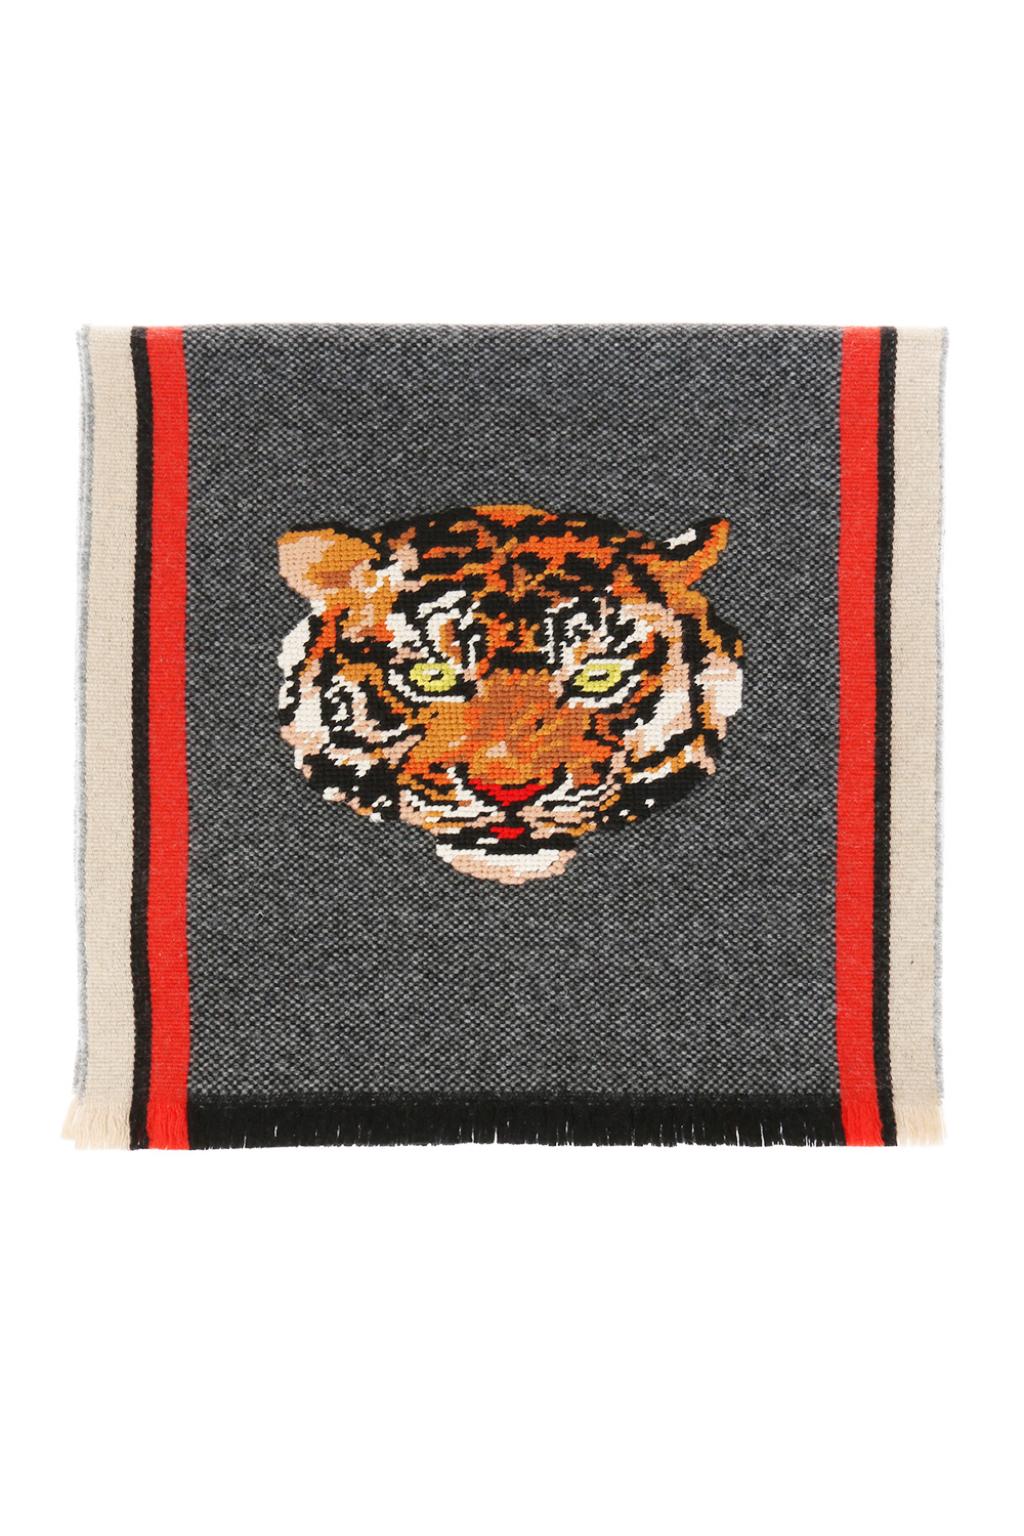 gucci embroidered tiger